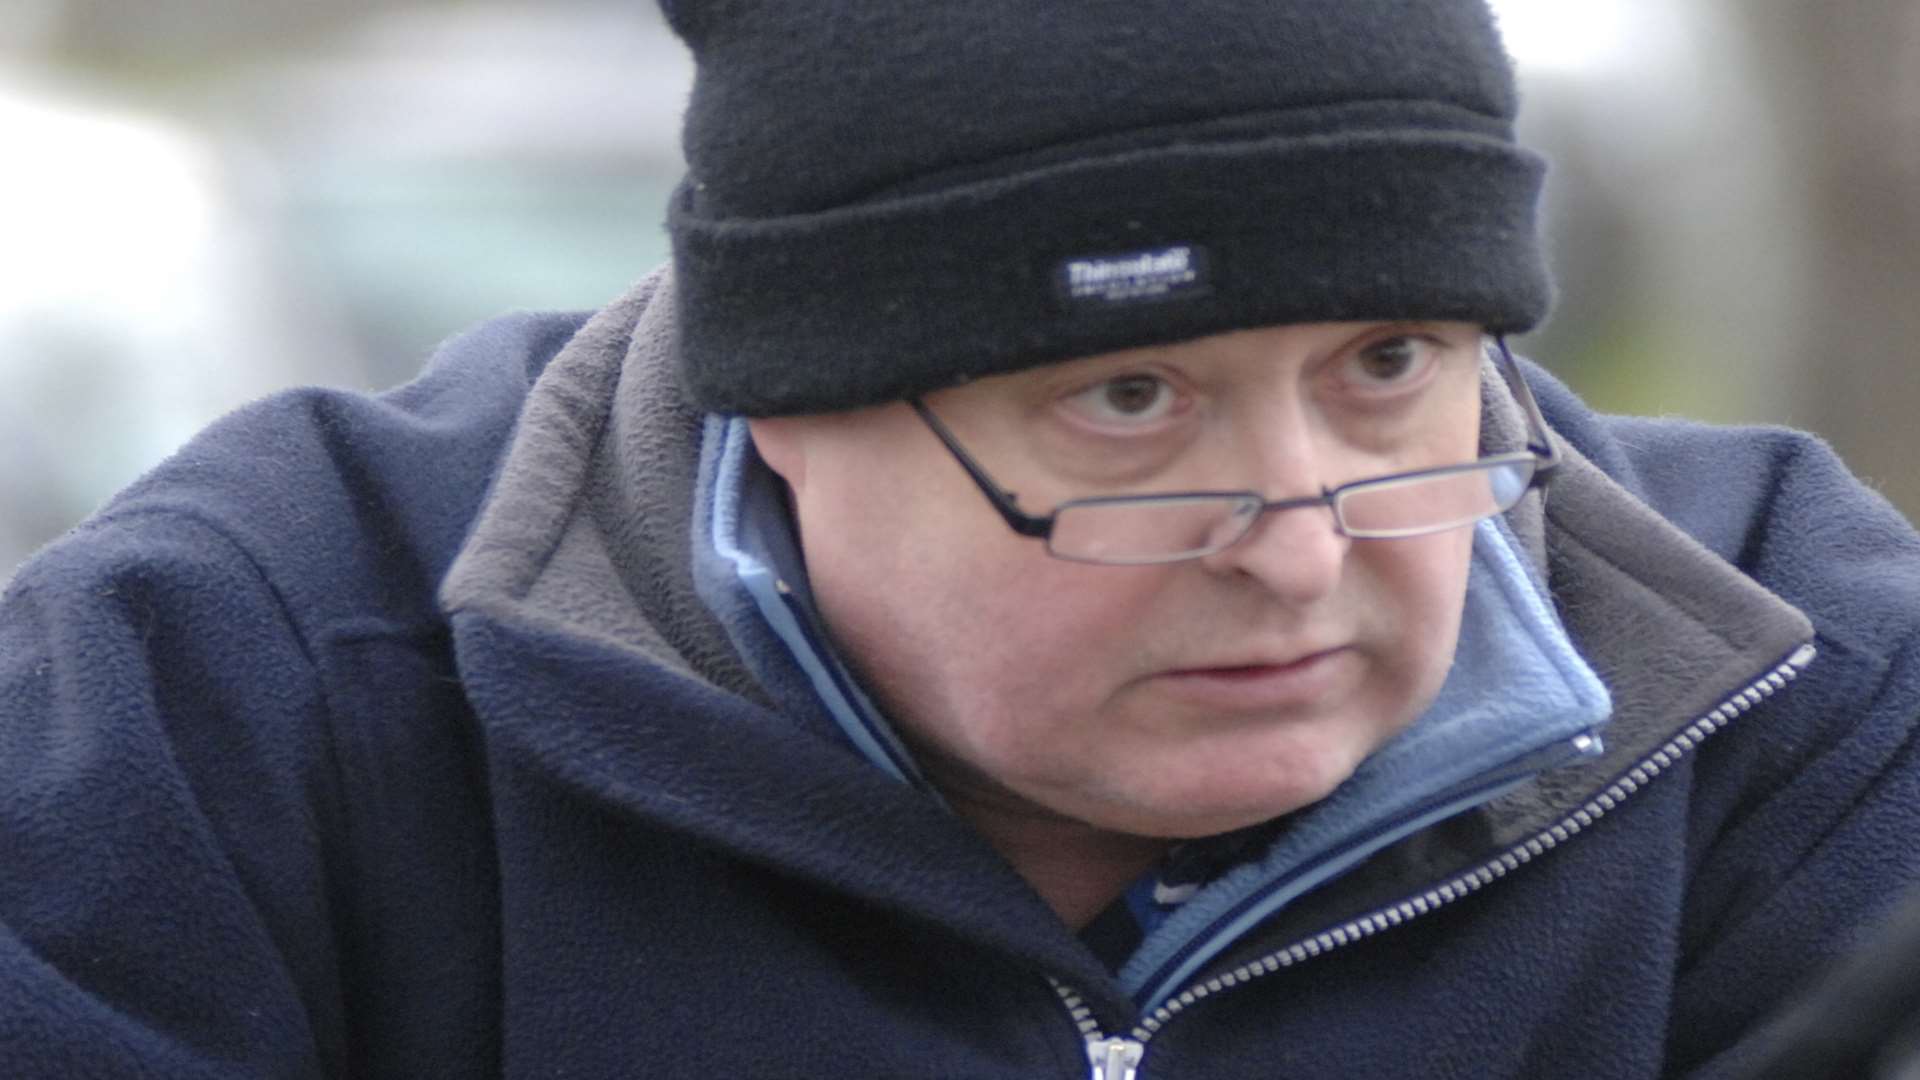 Canterbury nurse Dale Bolinger stood trial accused of attempting to meet a child after sexual grooming